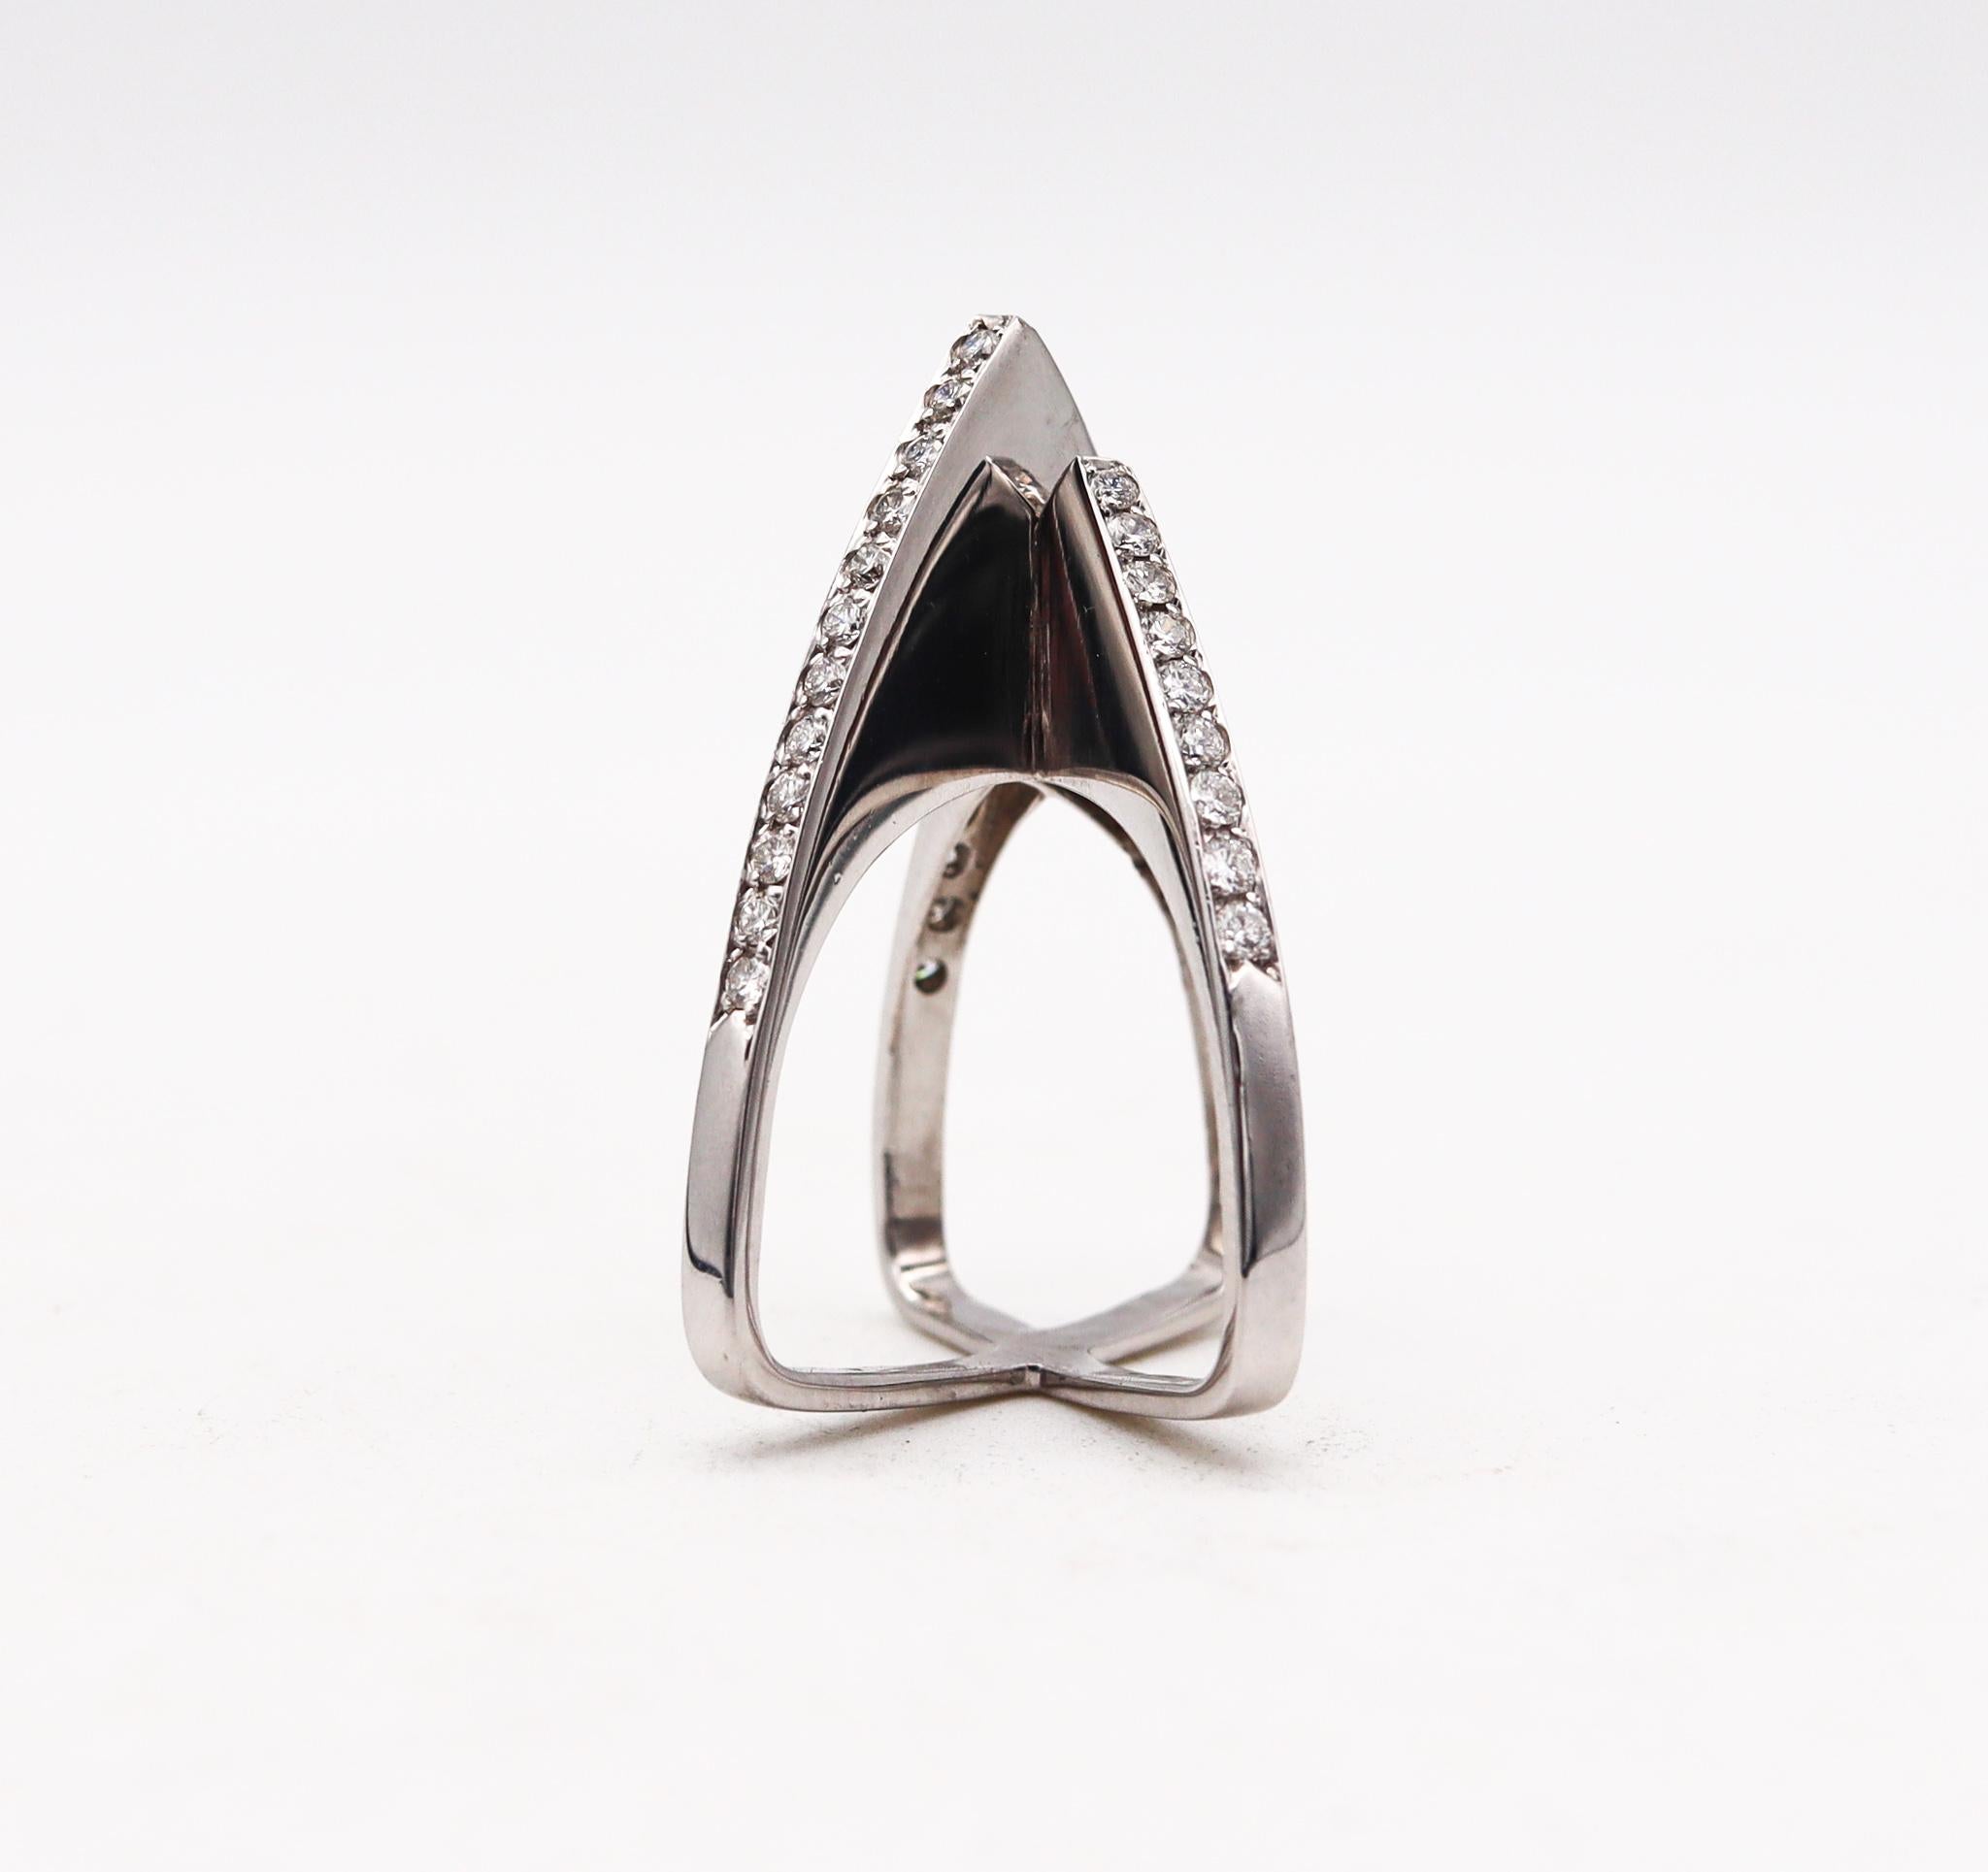 H. Stern Architectural Geometric Cocktail Ring 18Kt White Gold 1.05 Cts Diamonds For Sale 1